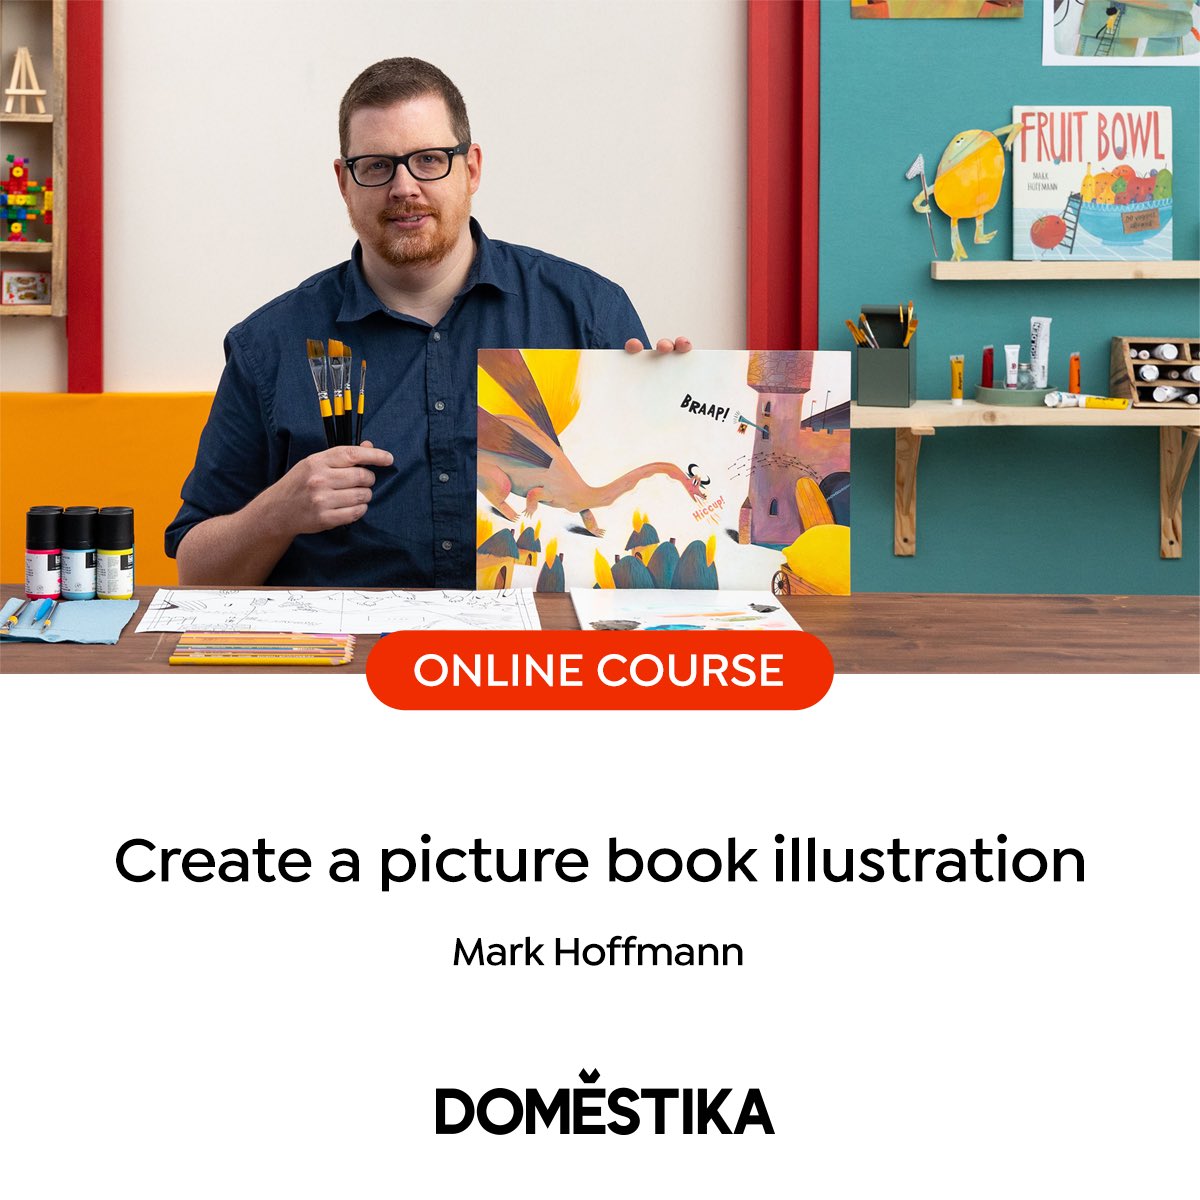 🚨Let’s get our learning started!!!🚨
MY COURSE IS OUT IN THE WORLD! I can’t wait to see who signs up and what they make. The link to the course is in my bio link. If you use that link it helps me out. 
#domestika #domestika_en #picturebookclass #teacherlife #teachergram #joinme